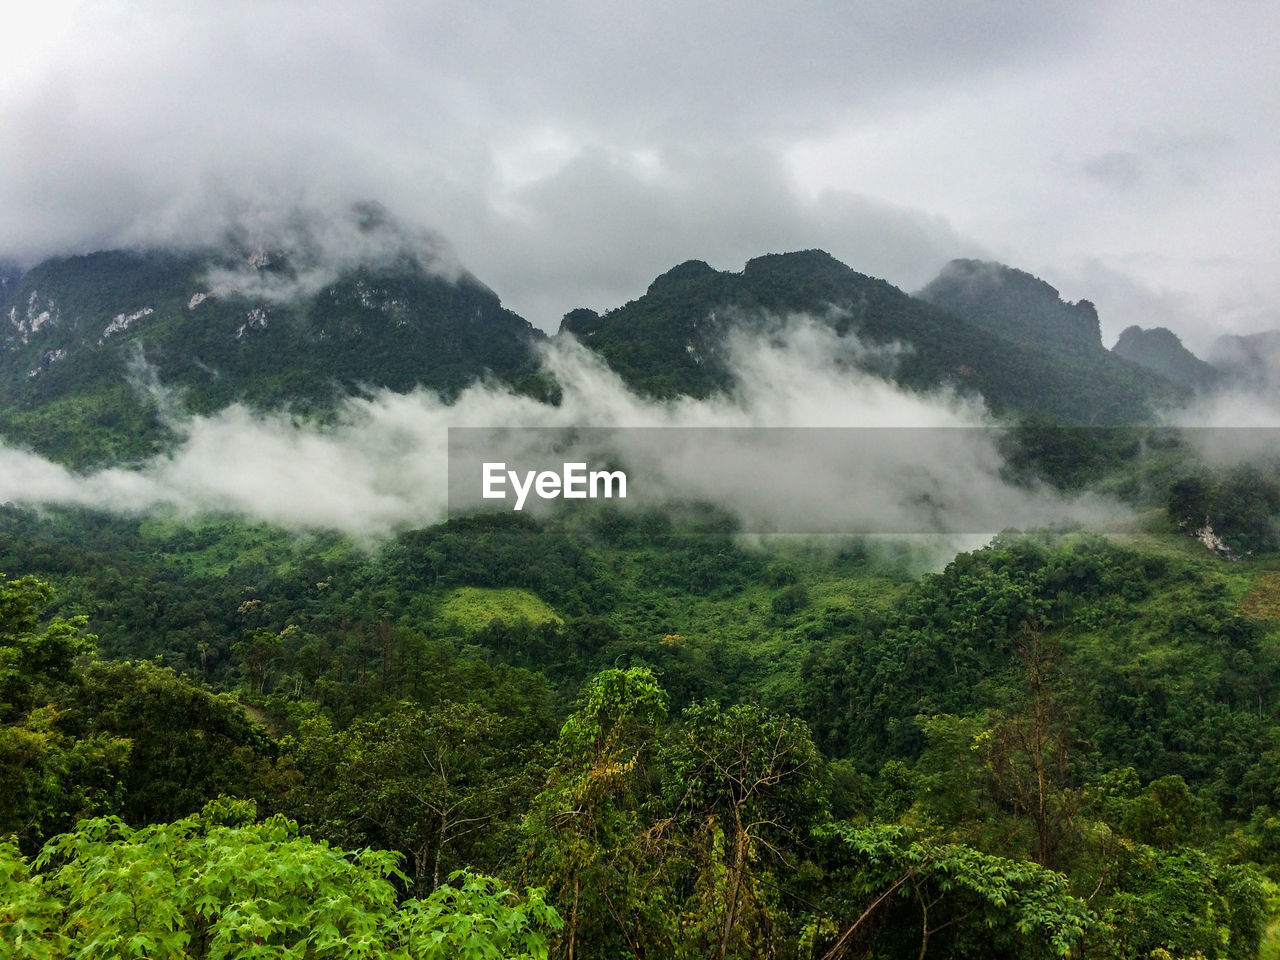 SCENIC VIEW OF MOUNTAINS AGAINST SKY DURING FOGGY WEATHER